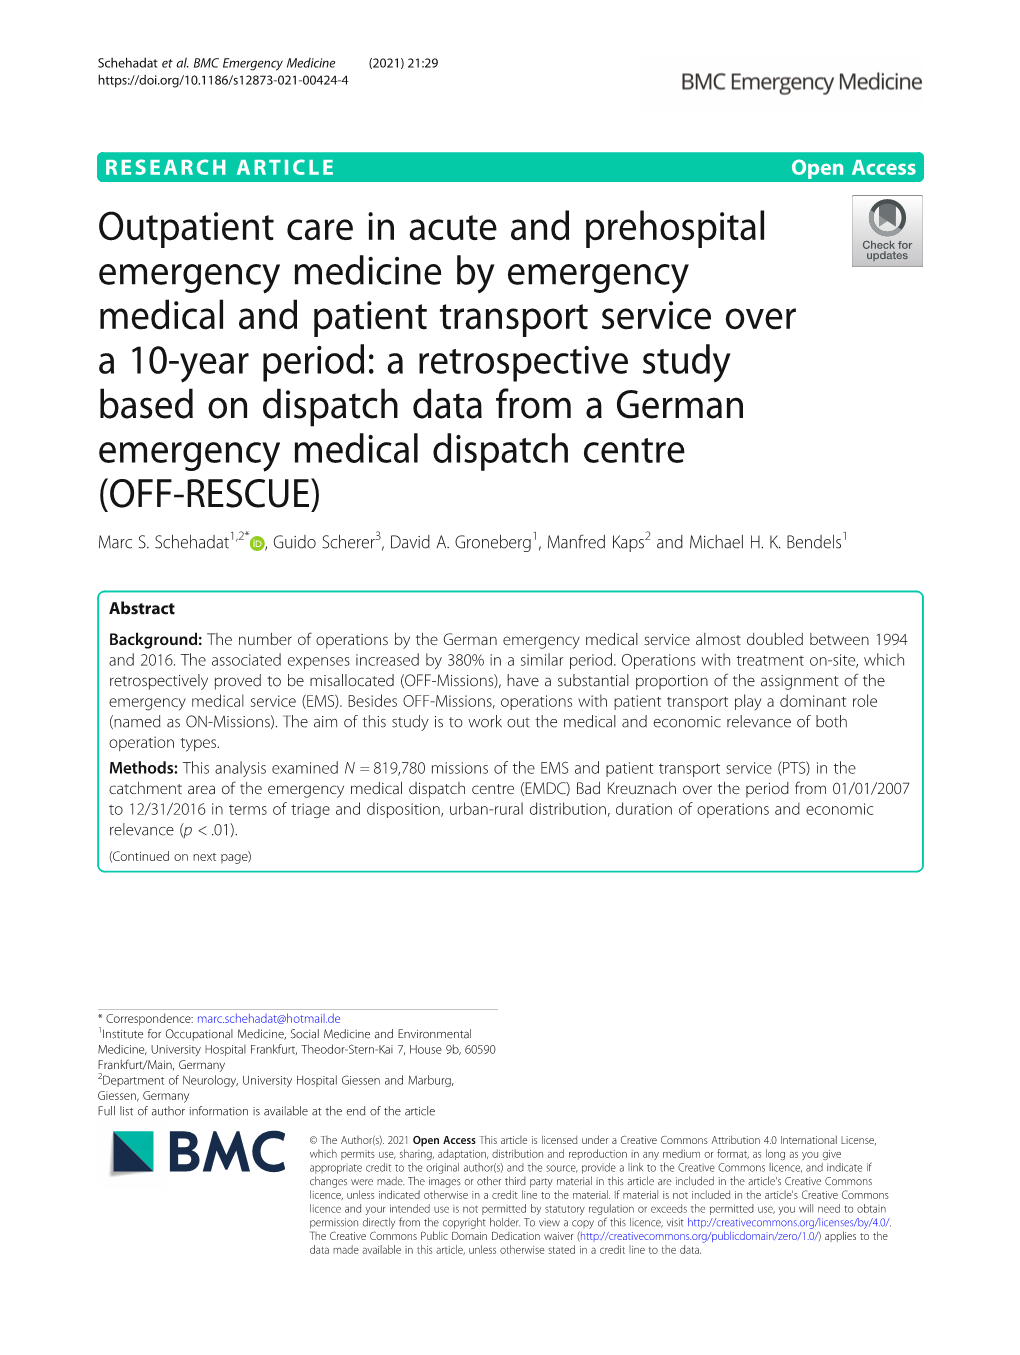 Outpatient Care in Acute and Prehospital Emergency Medicine By